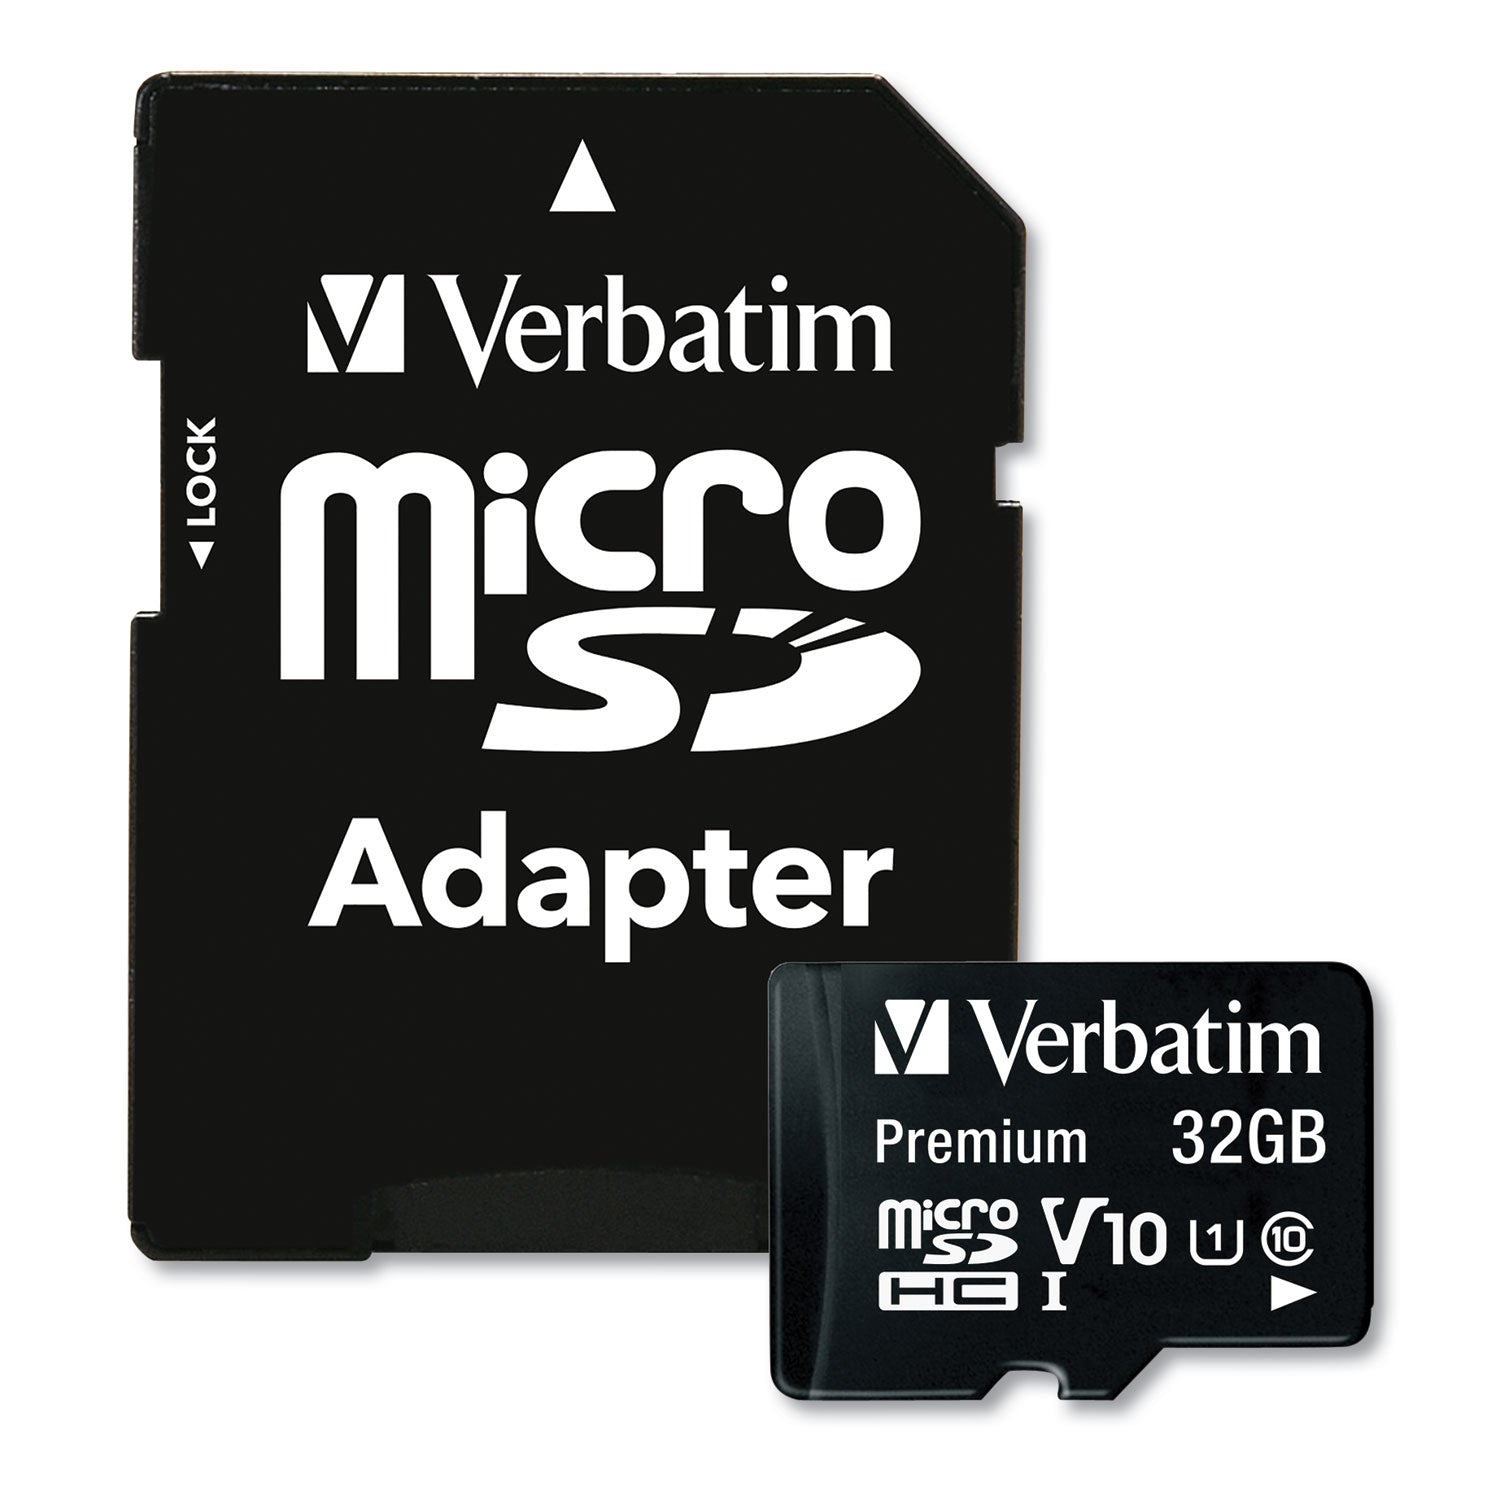 32GB Premium microSDHC Memory Card with Adapter, UHS-I V10 U1 Class 10, Up to 90MB/s Read Speed - 